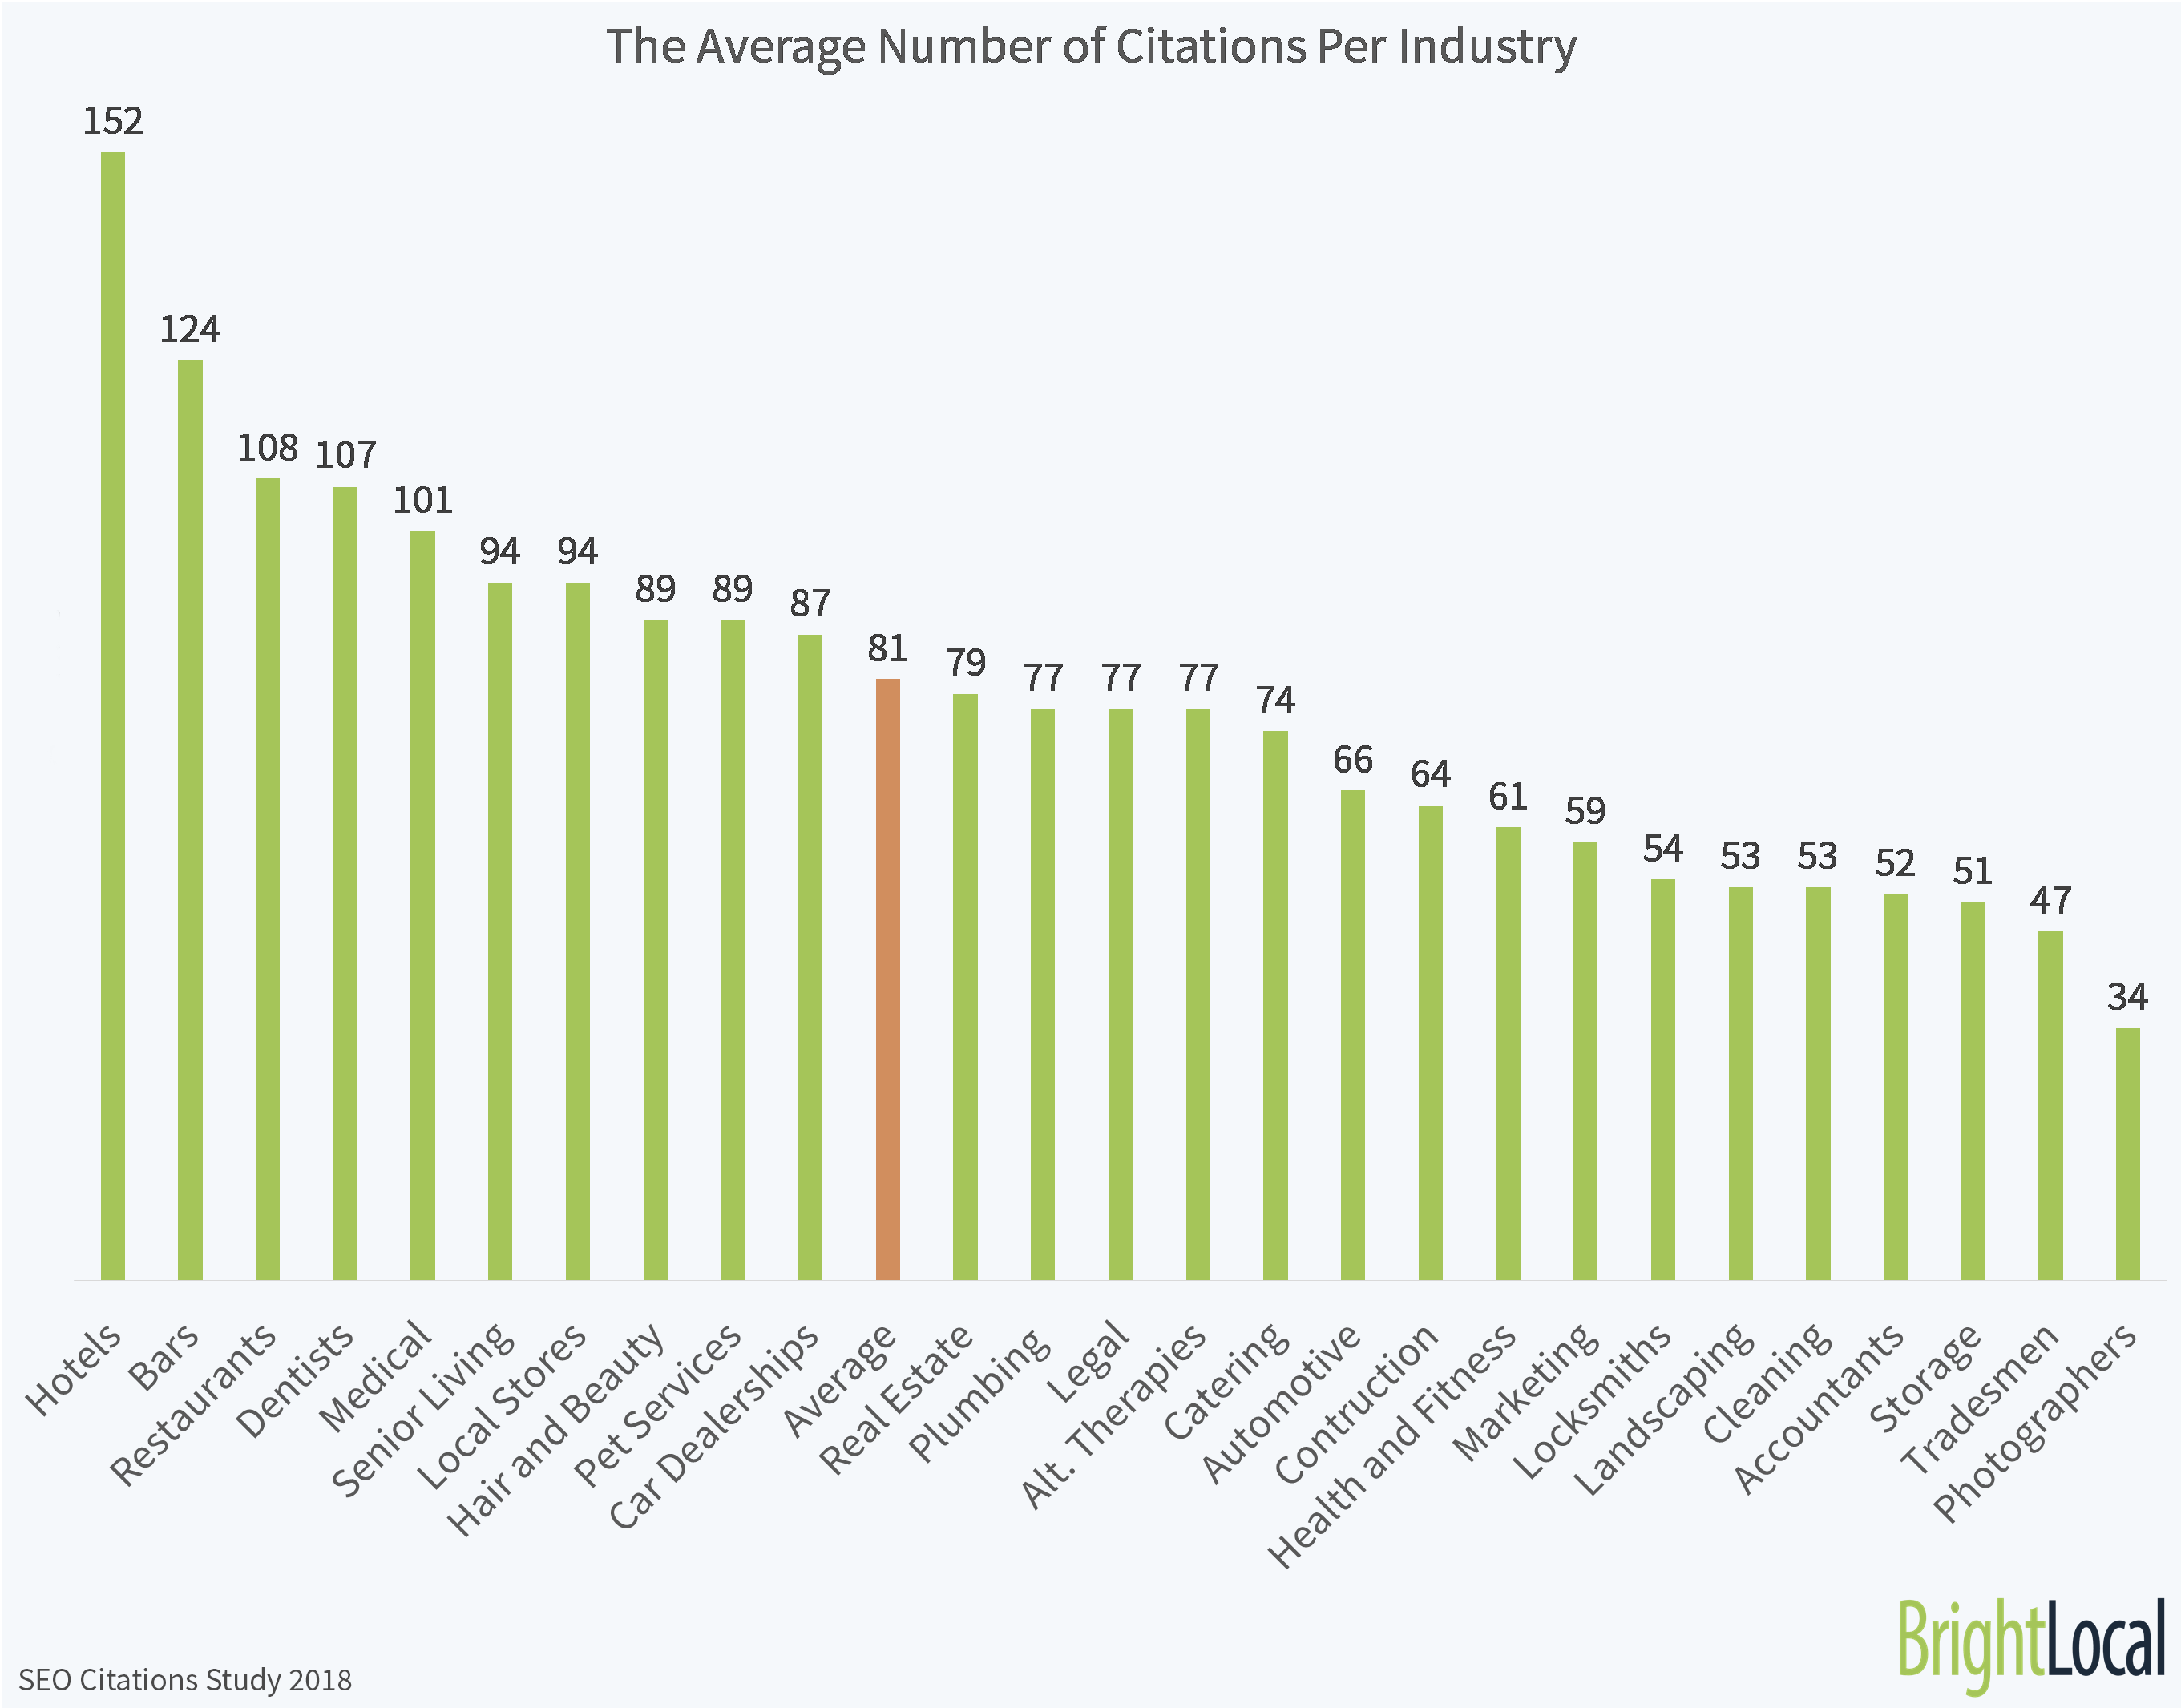 BrightLocal SEO Citations Study - Average Number of Citations Per Industry